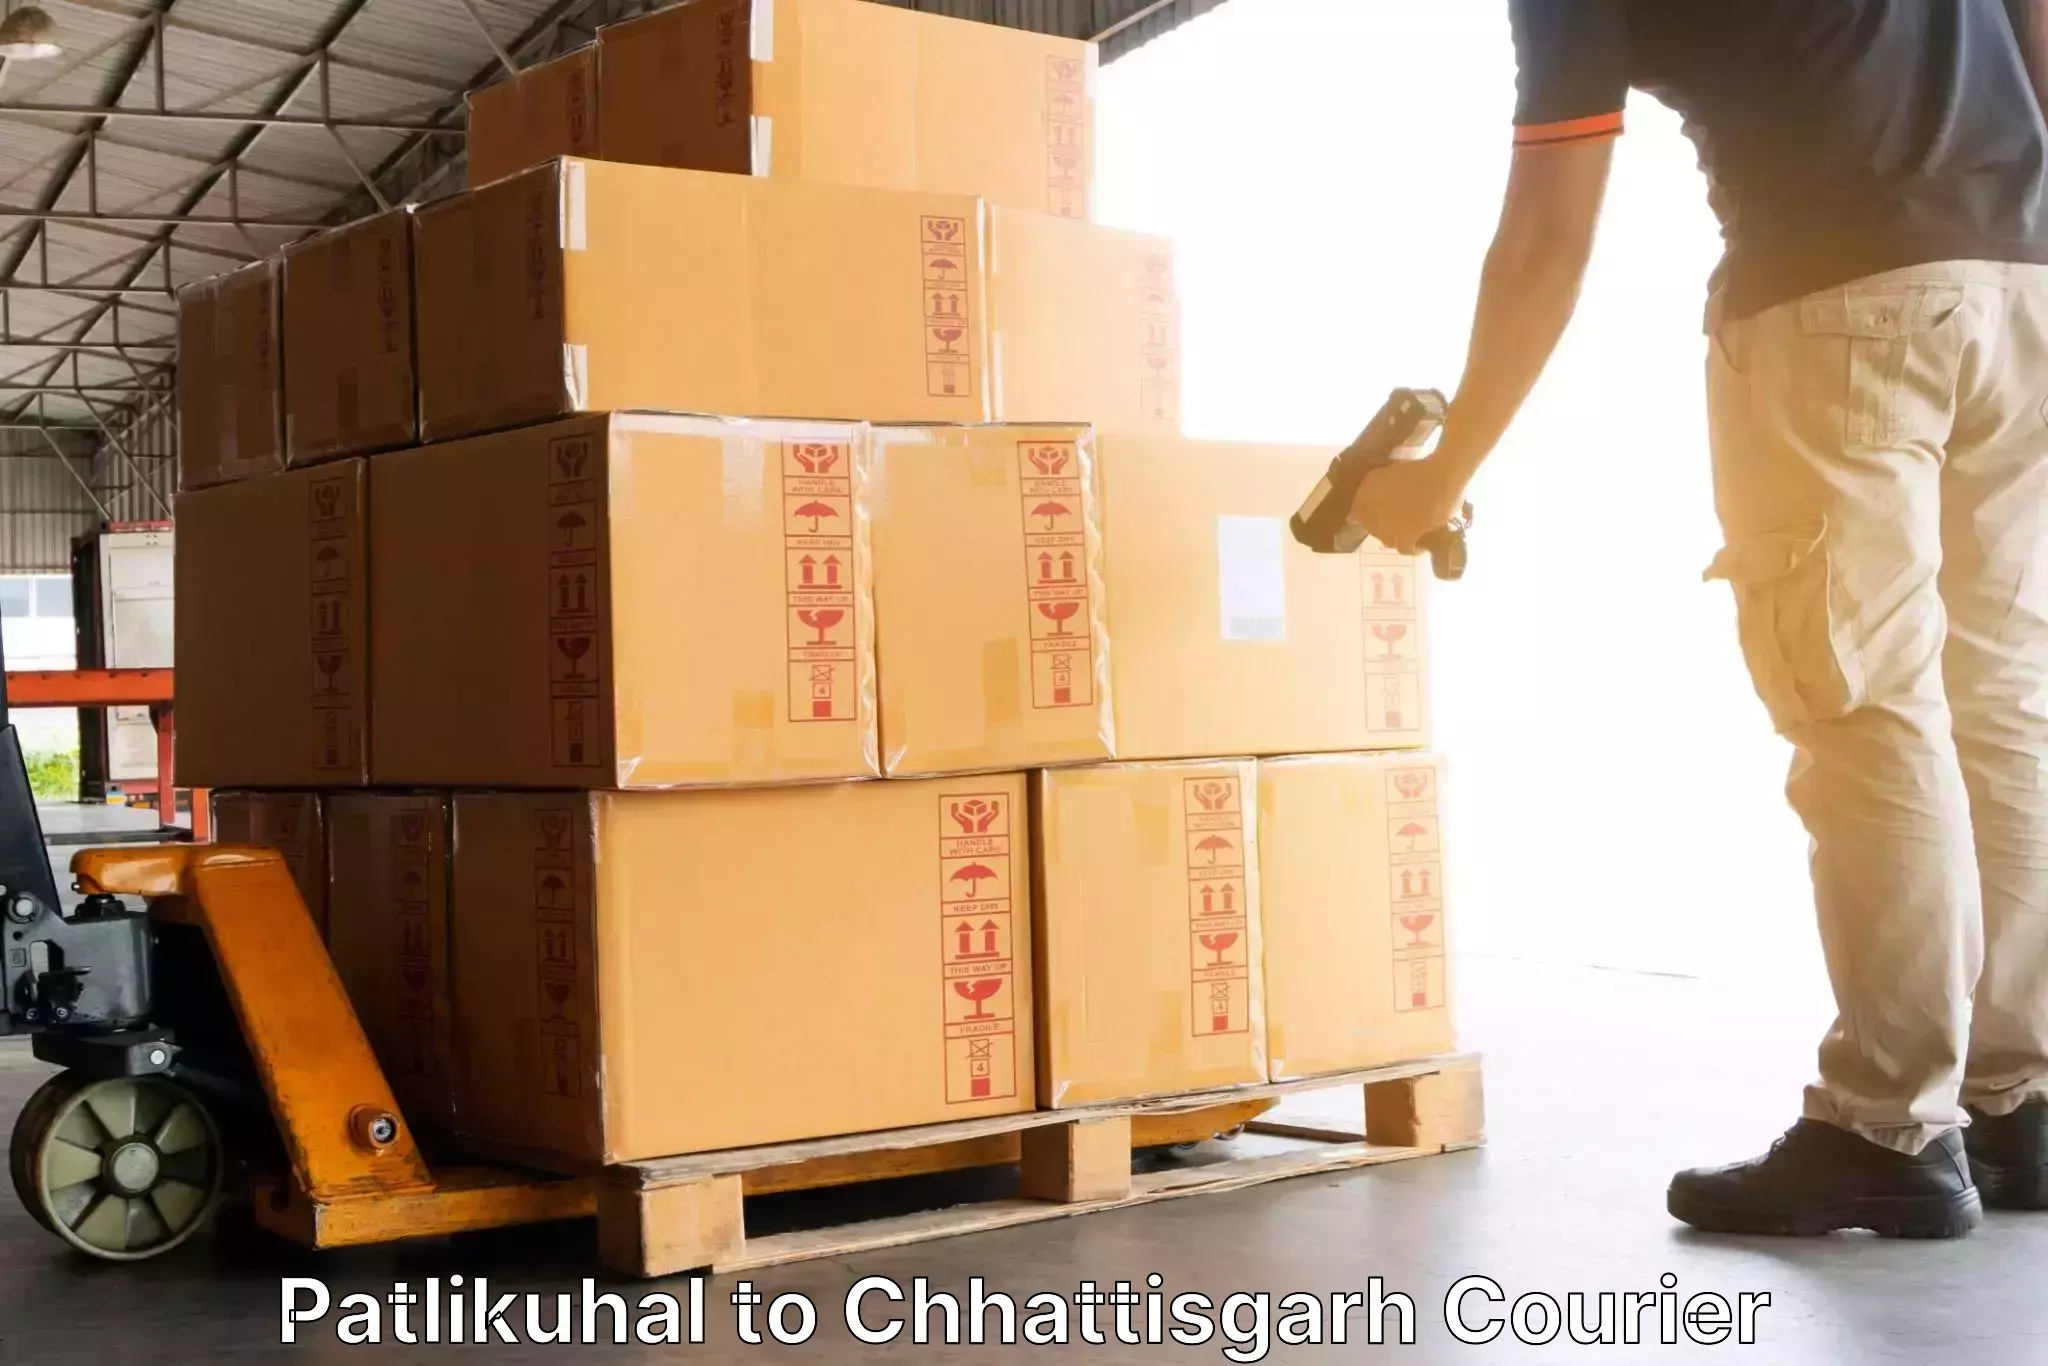 Courier dispatch services Patlikuhal to Raigarh